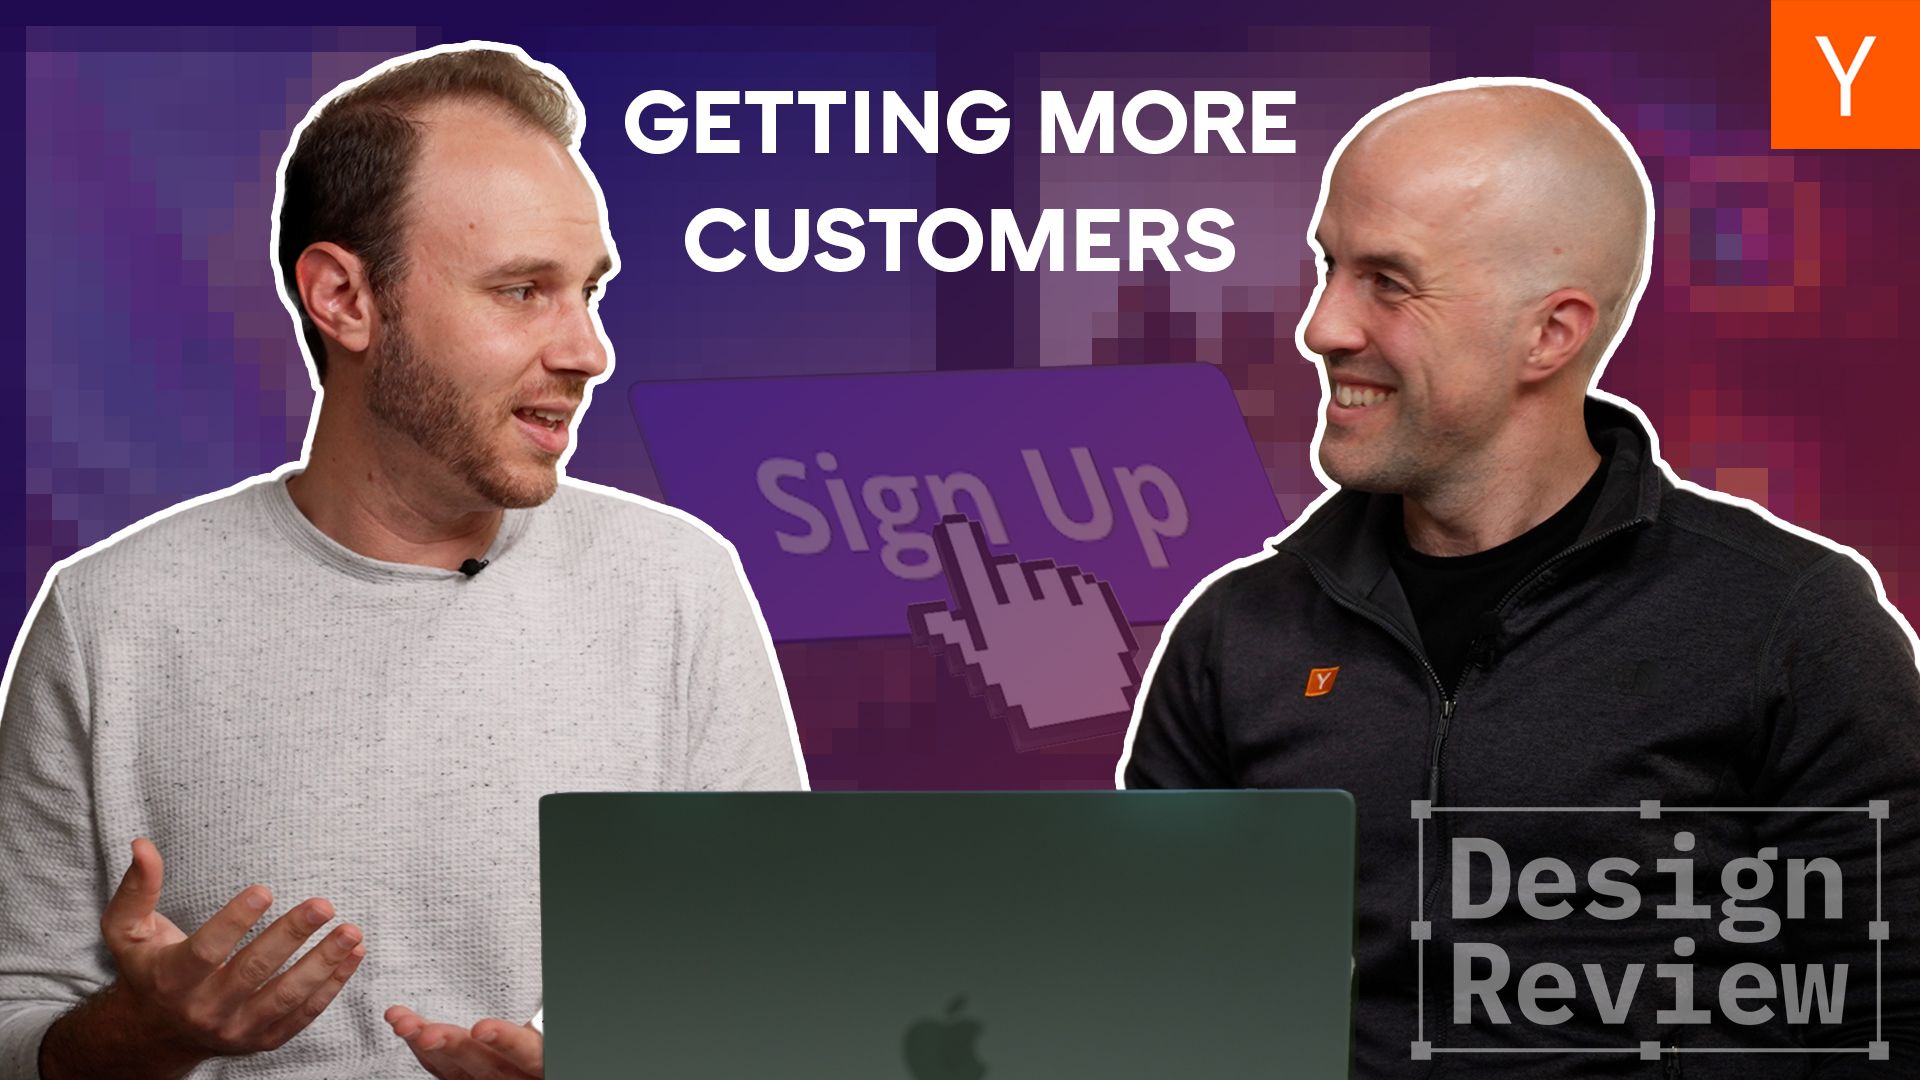 YC's Aaron Epstein and Pete Koomen in front of a purple background. Title text reads "Getting more customers"